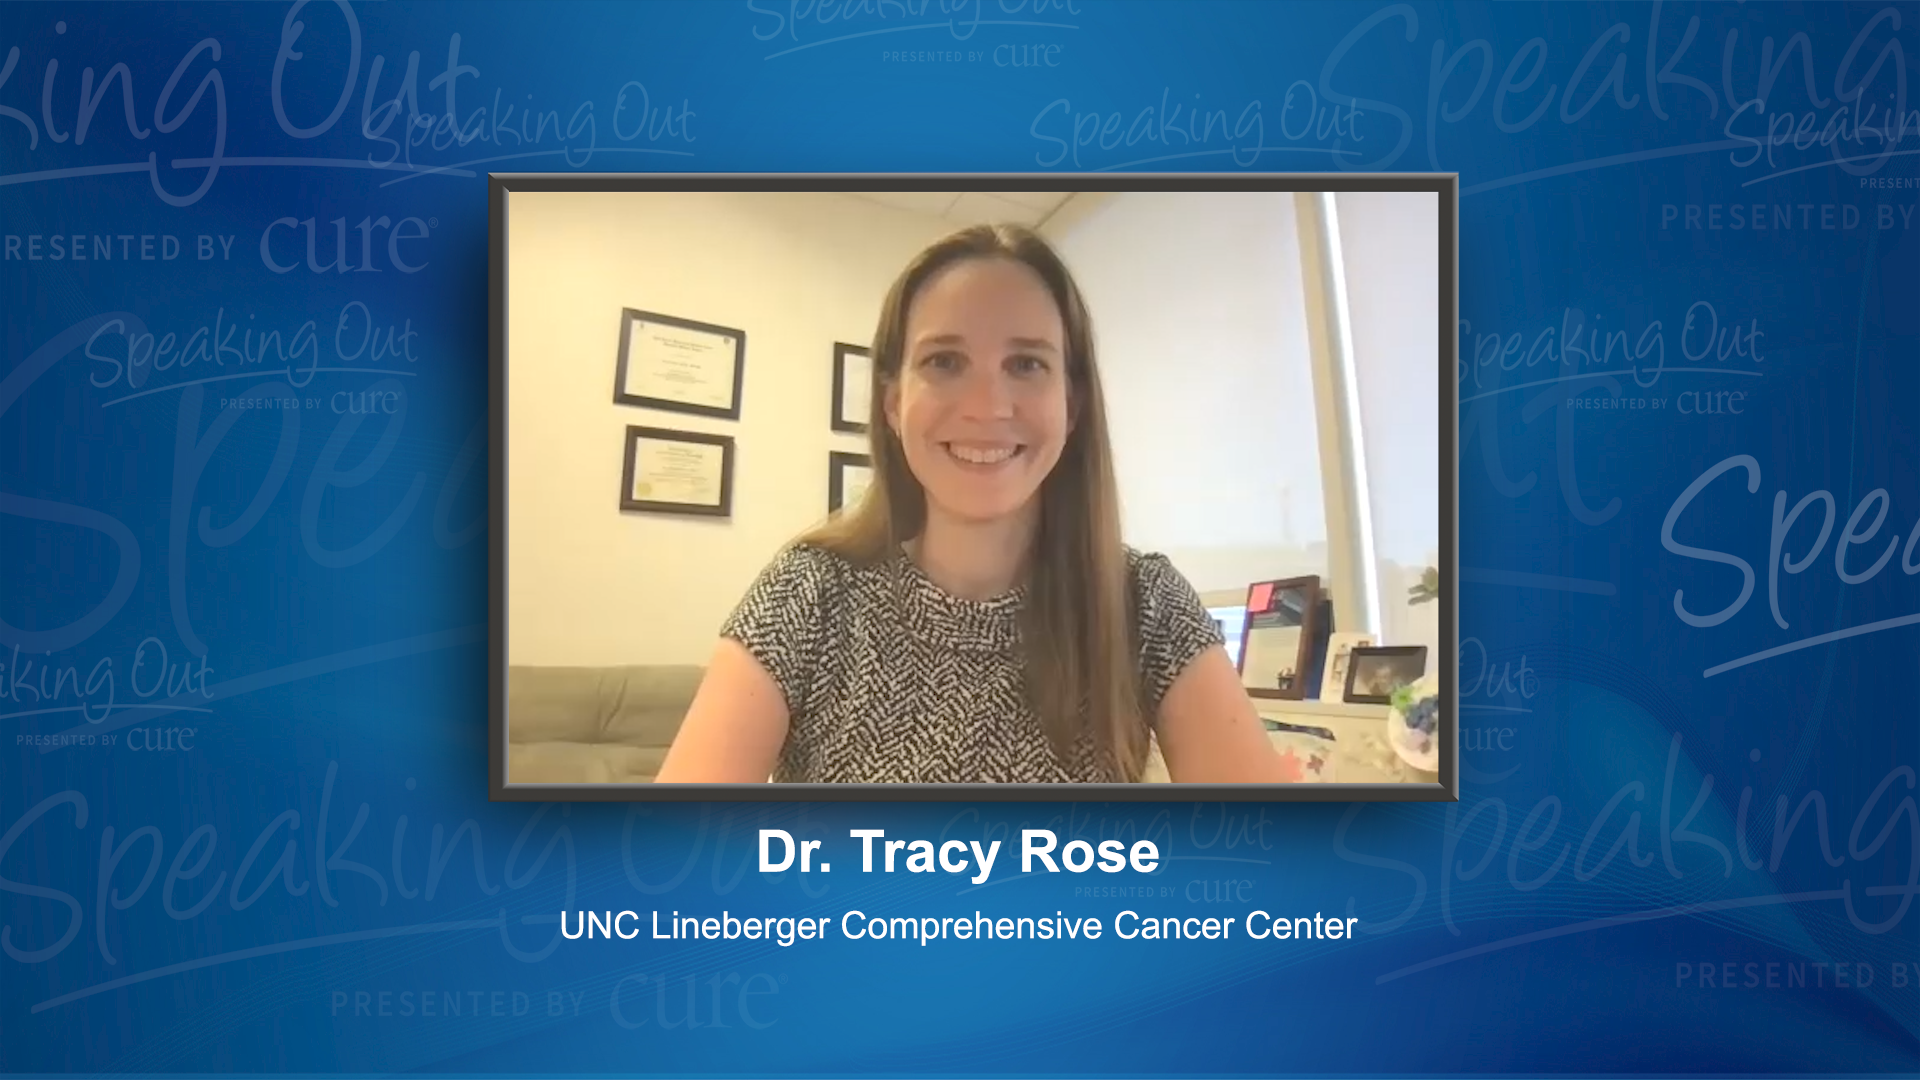 Dr. Tracy Rose